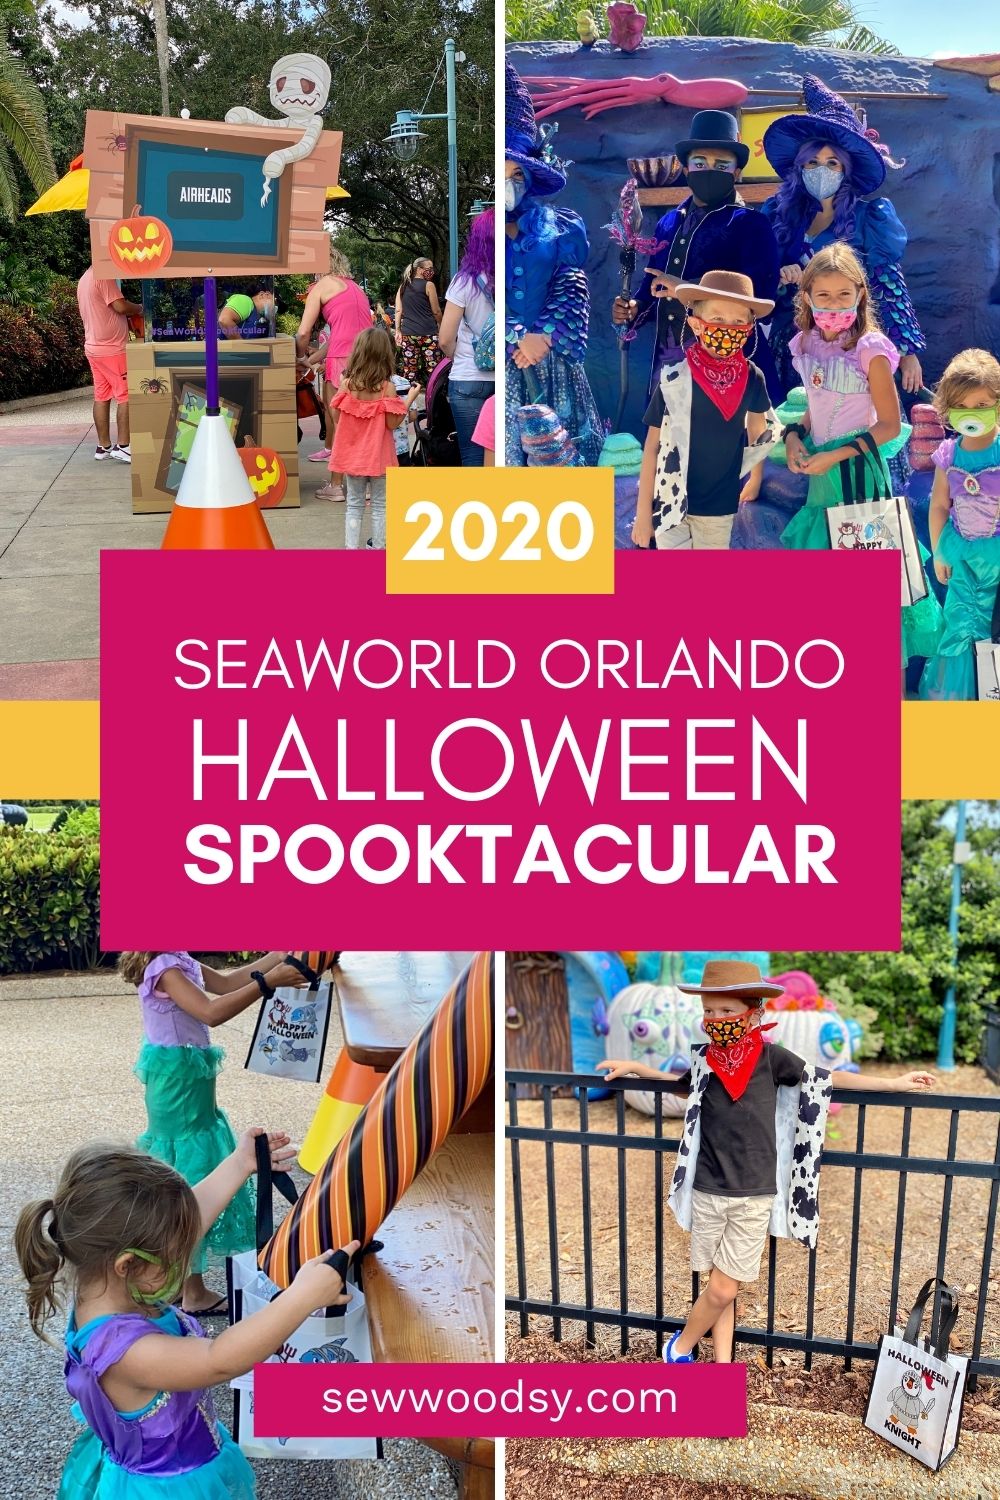 Four photos from SeaWorld Orlando Spooktacular wtih text on image for Pinterest.